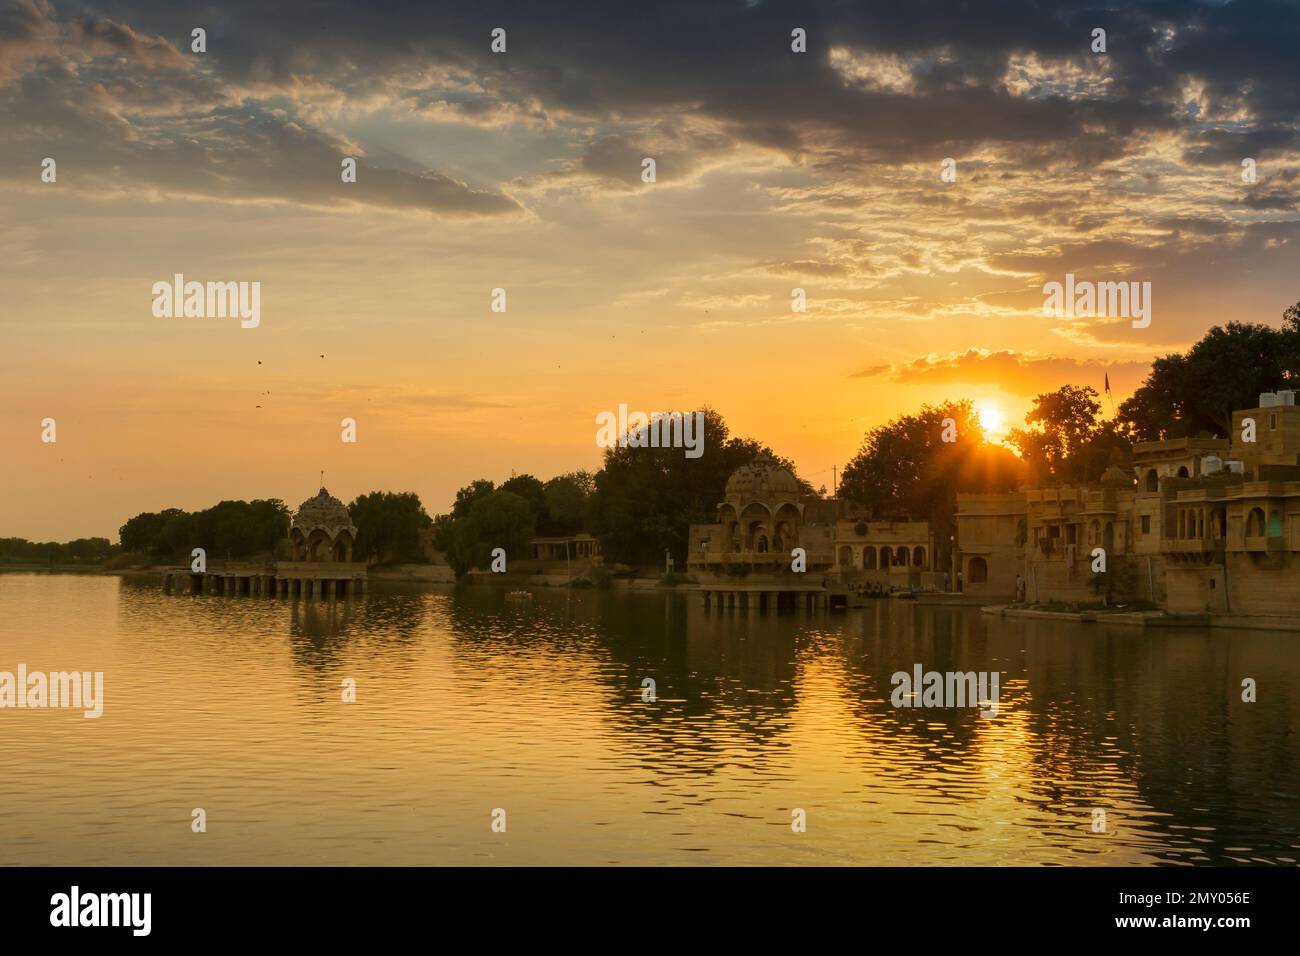 Beautiful sunset at Gadisar lake, Jaisalmer, Rajasthan, India. Setting sun and colorful clouds in the sky with view of the Gadisar lake. Stock Photo